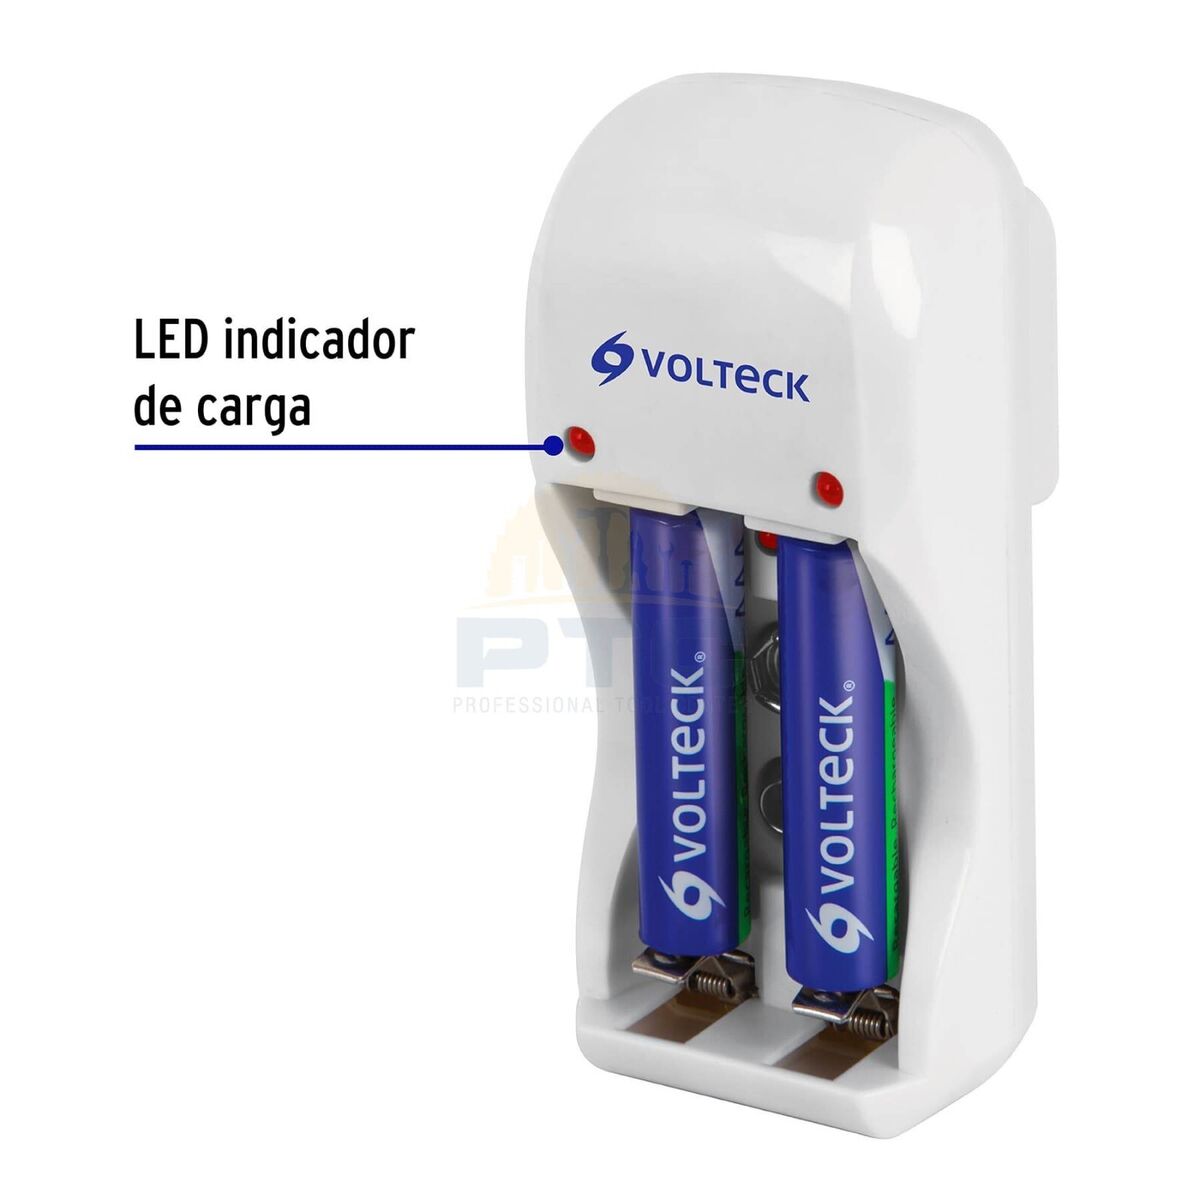 Volteck CA-RE-7 Battery charger, AA, AAA and 9V includes 2 AAA batteries